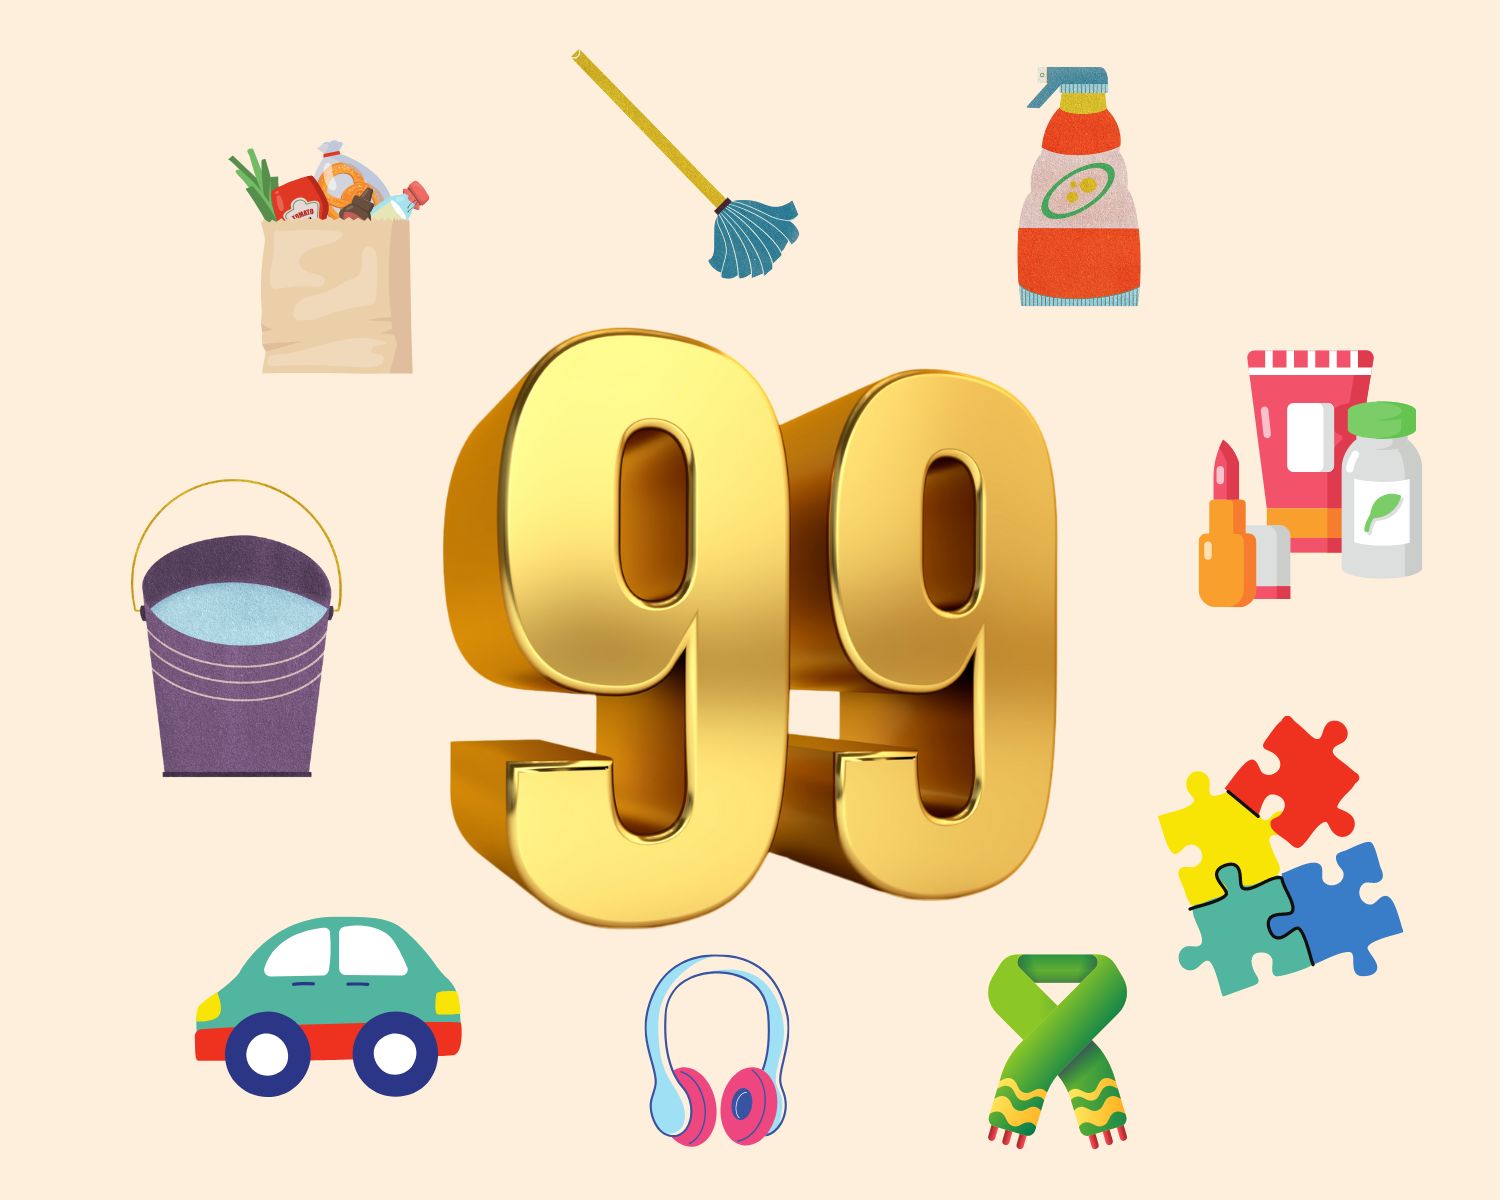 99 store products